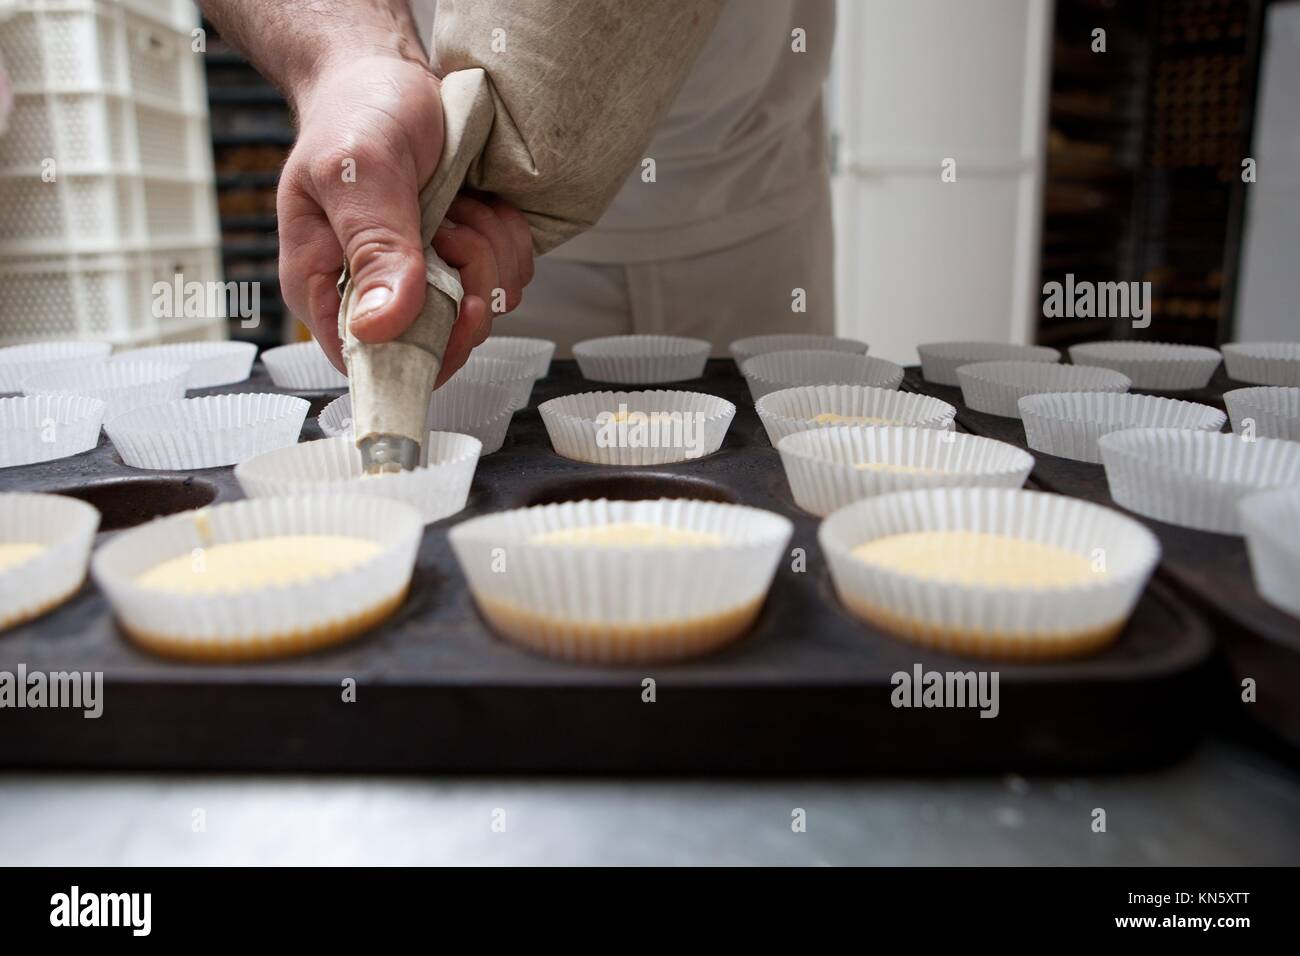 Baking cups being piped. Handmade manufacturing process of spanish madeleines. Stock Photo